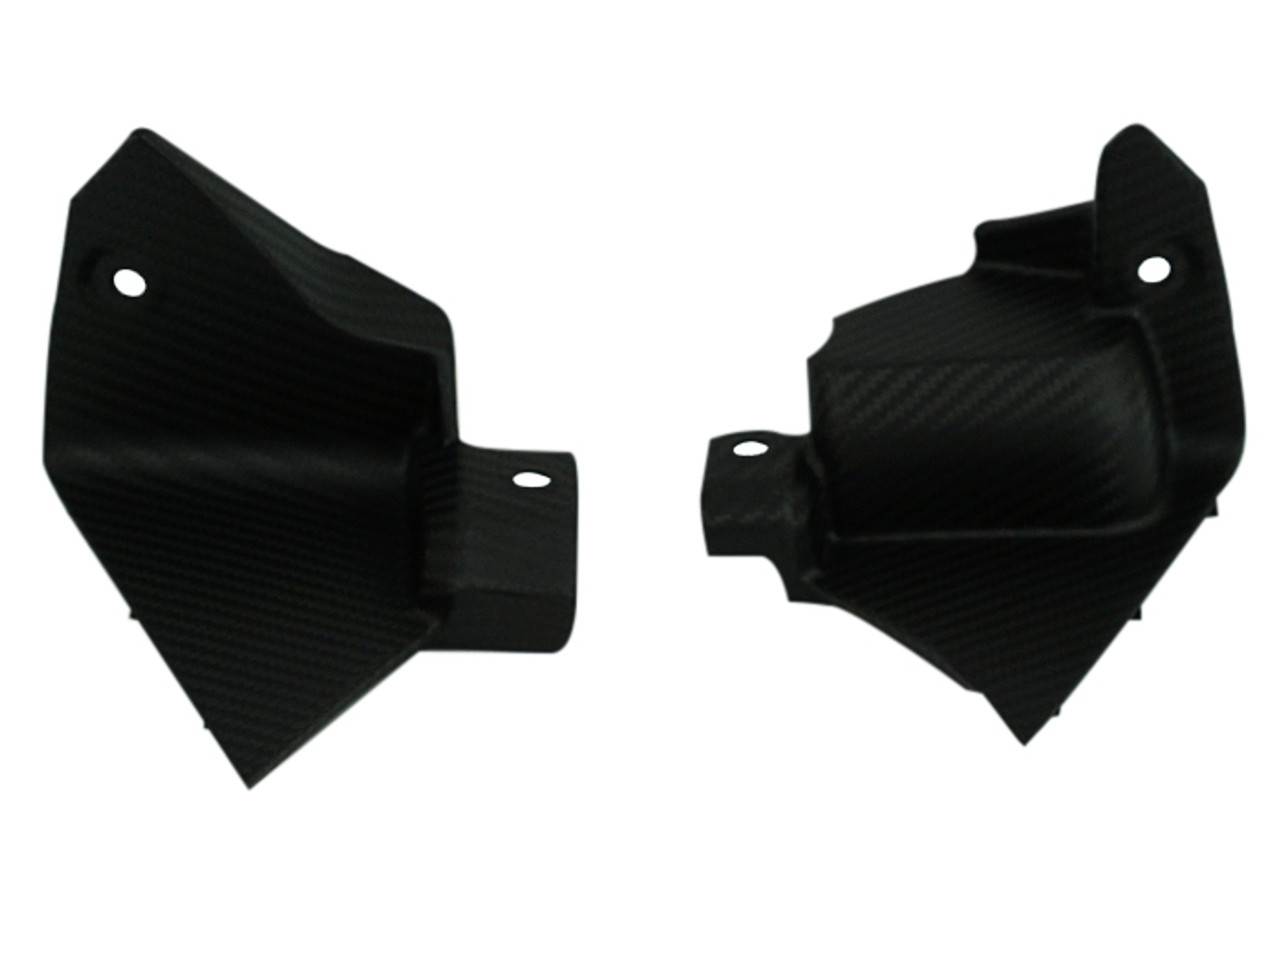 Inner Front Cowl Panels in Matte Twill Weave Carbon Fiber for Yamaha R1 2020+